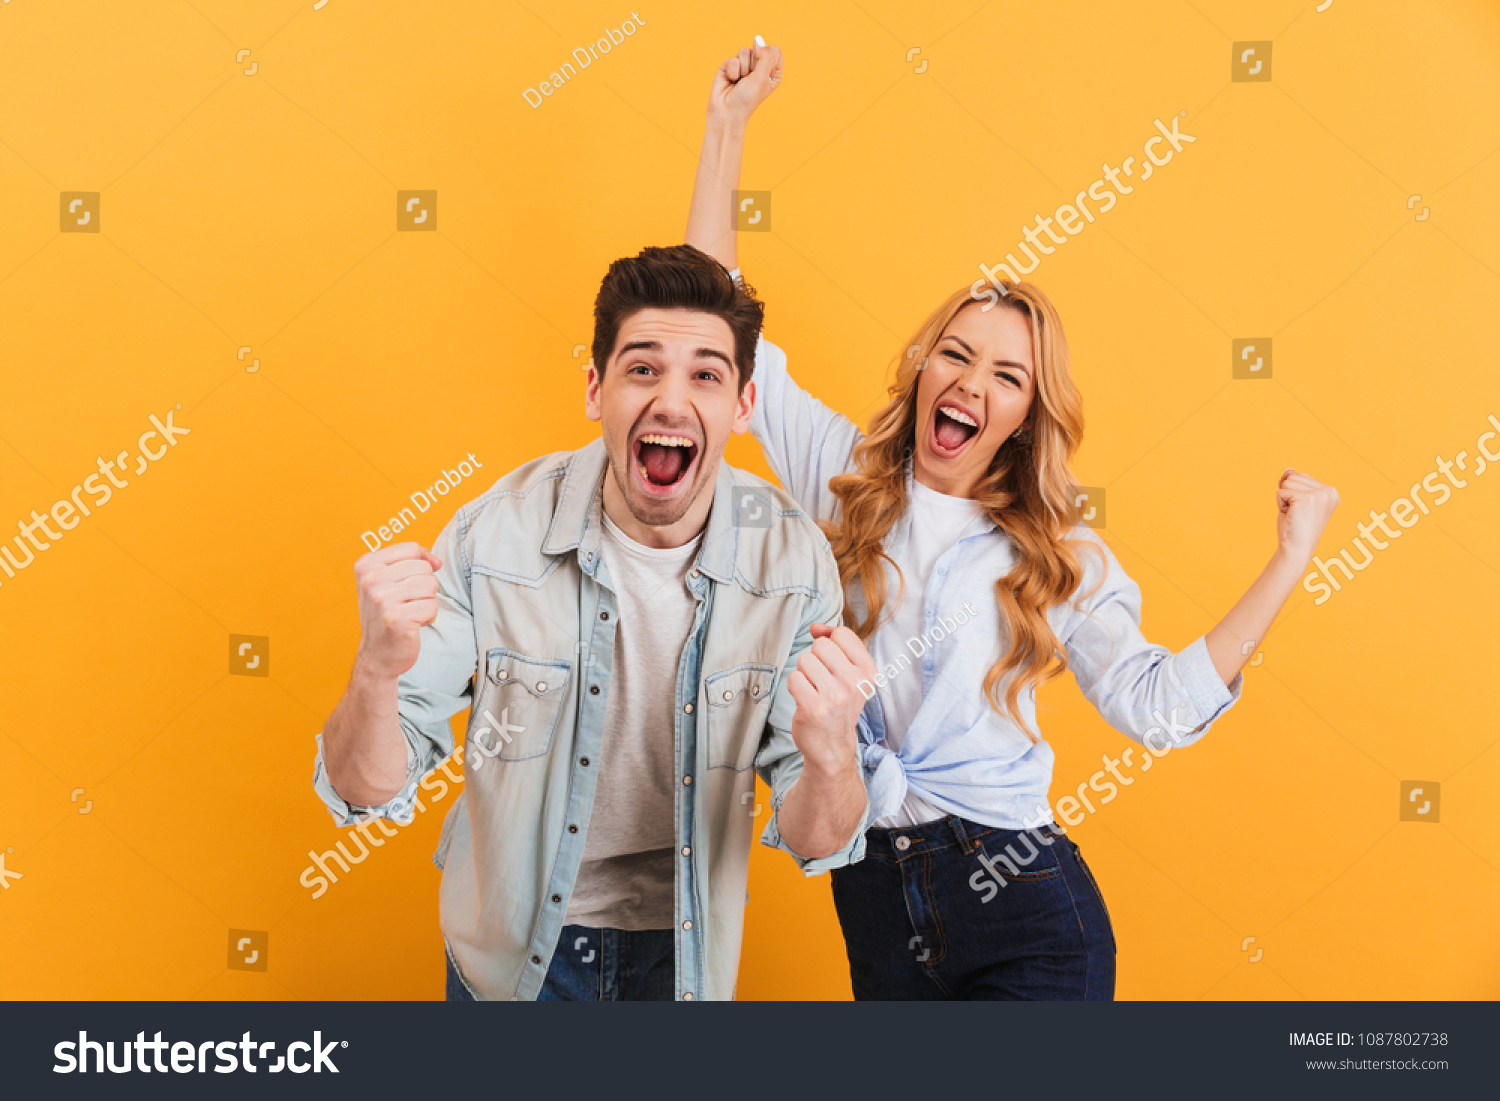 Portrait of cheerful people man and woman in basic clothing smiling and clenching fists like winners or happy people isolated over yellow background #1087802738